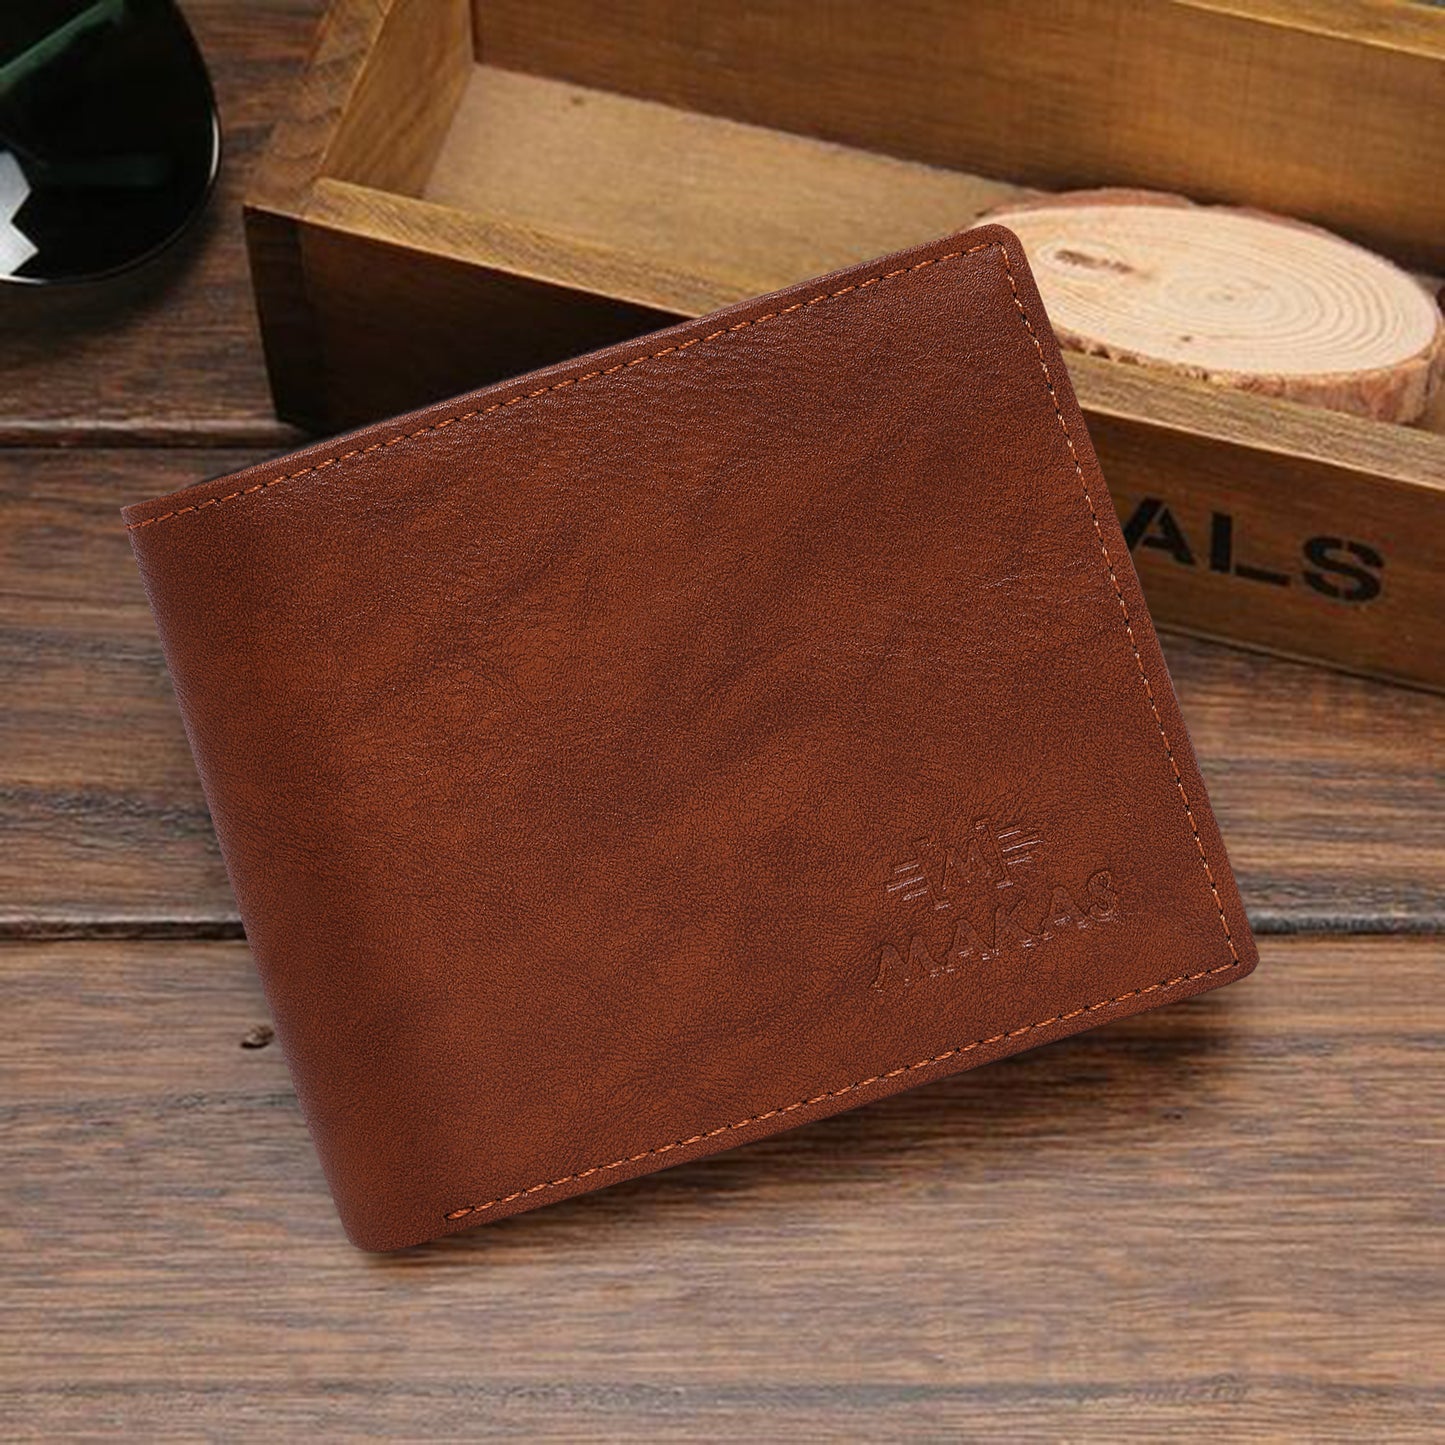 Makas Men's Card Holder Wallet - Front View - Colour brown